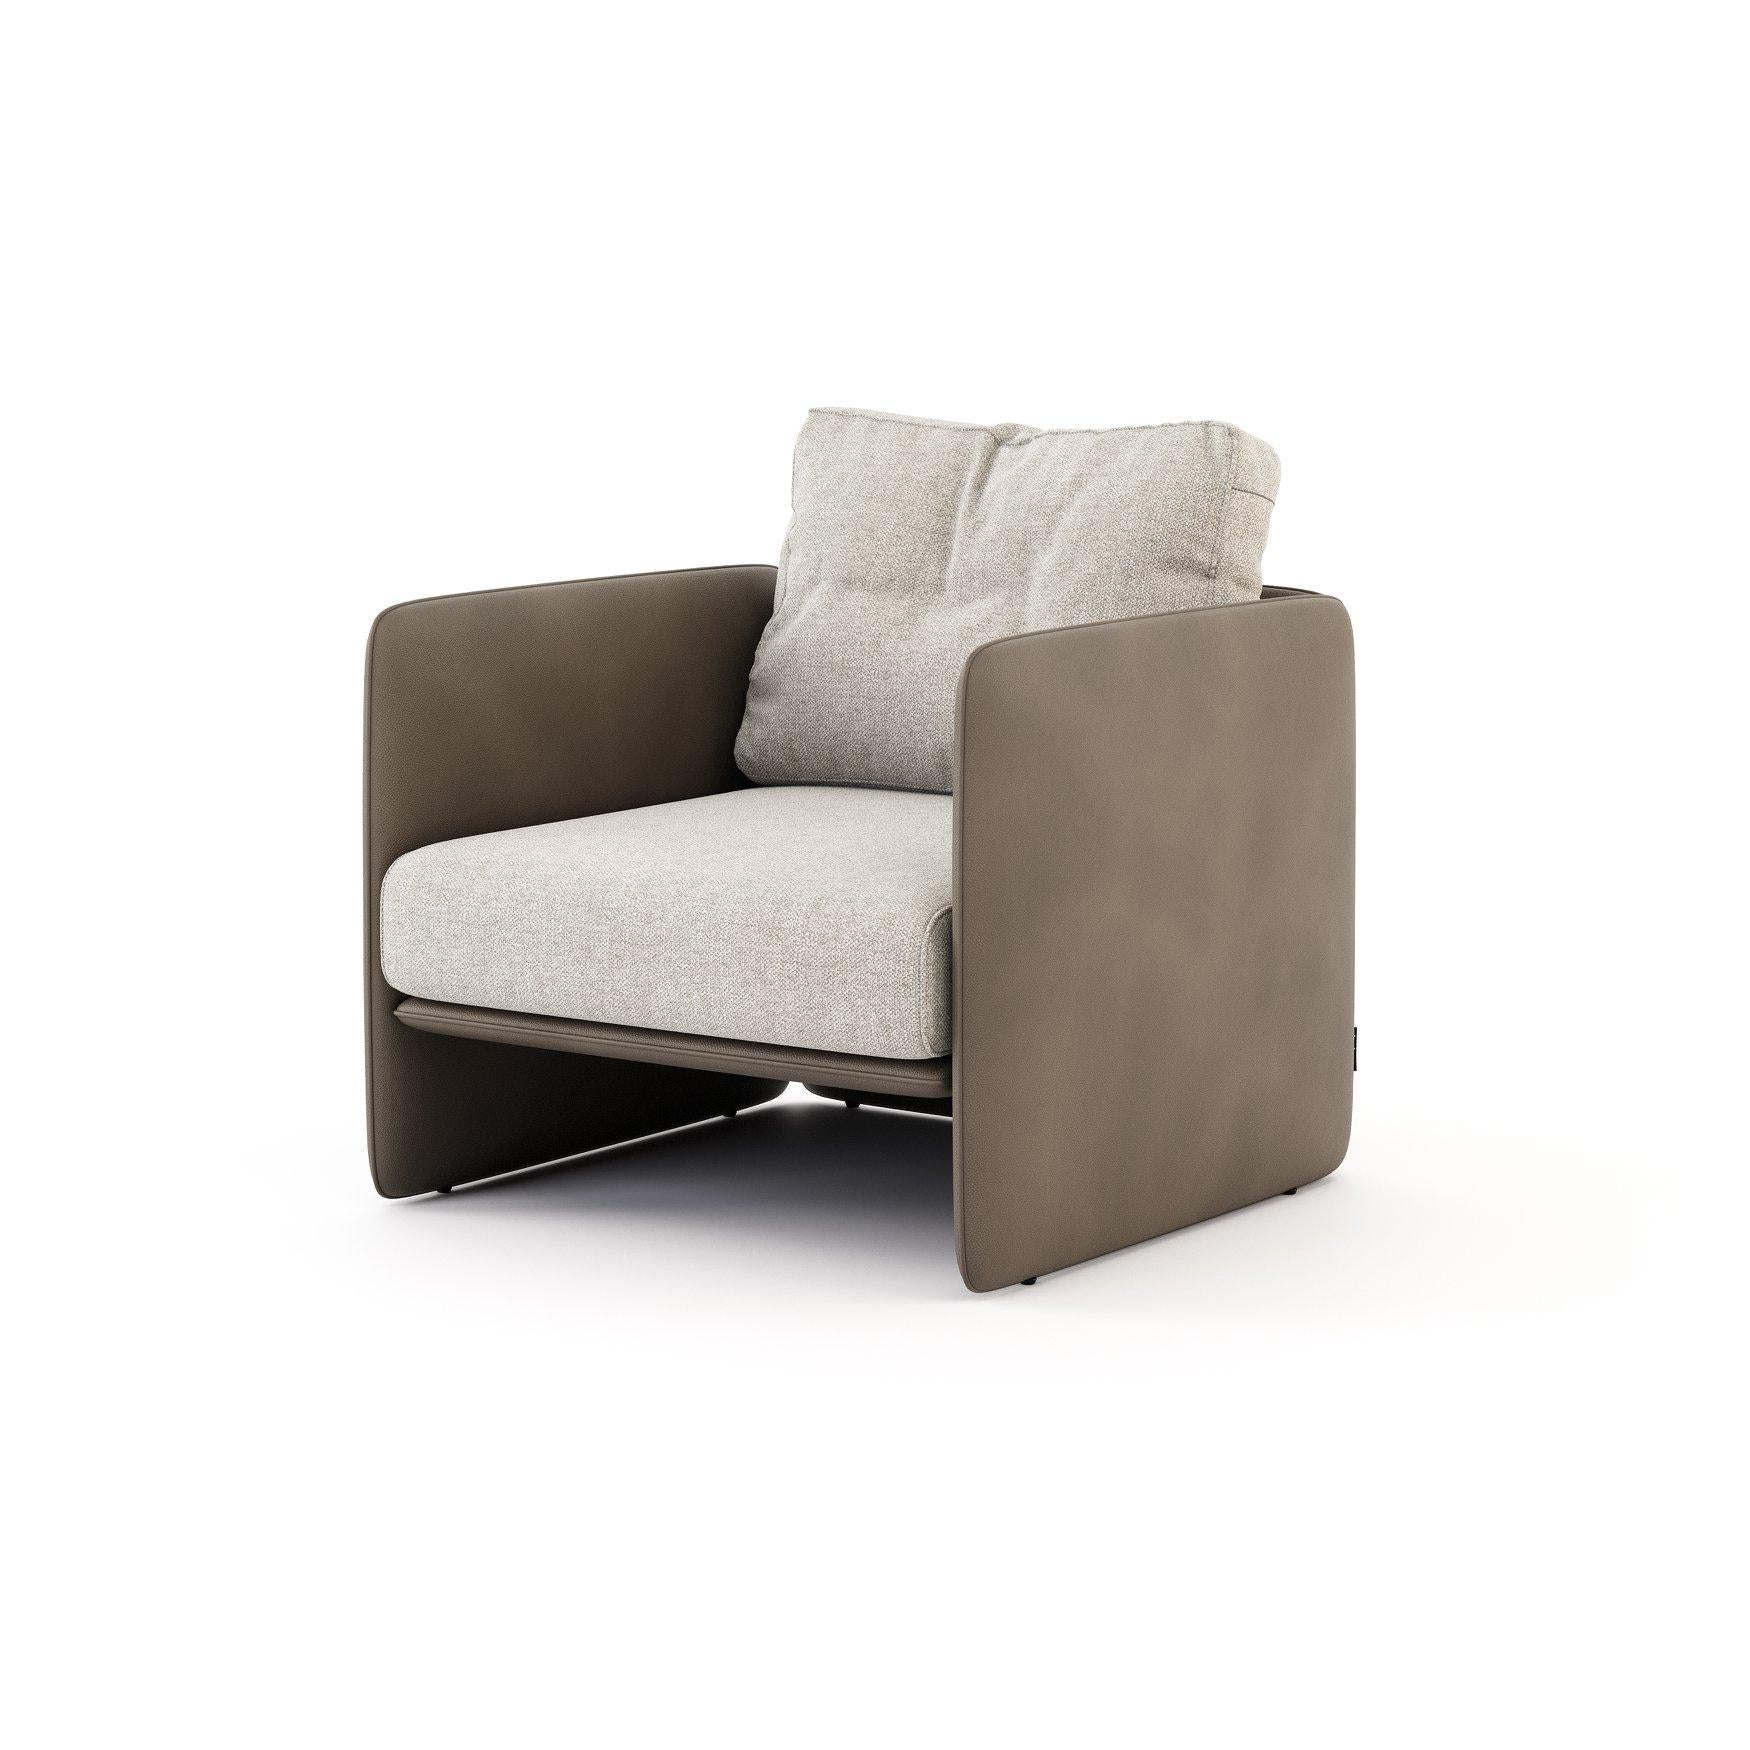 This is a one-of-a-kind armchair that perfectly matches the square shapes of its structure with the soft curves and comfort of the upholstery. The padded structure is upholstered in a different fabric as the seat and back pillows. You can mix and